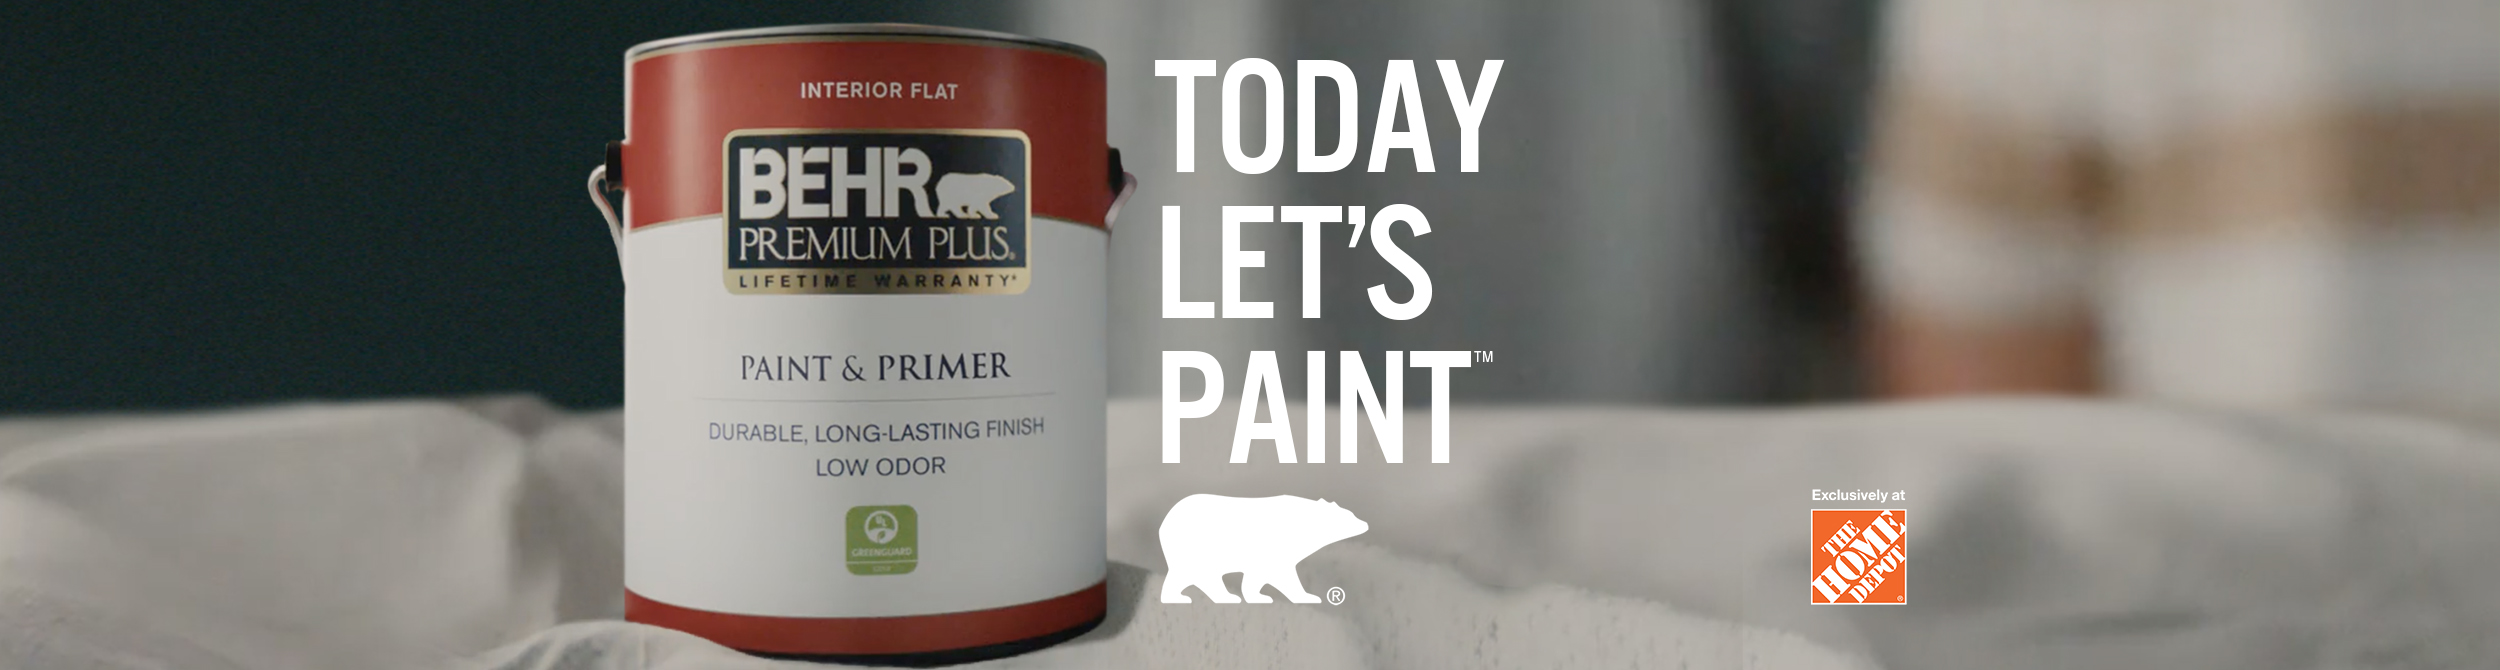 Person getting ready to paint with a can of BEHR Premium Plus Flat interior paint and the words Today Let's Paint in the foreground.